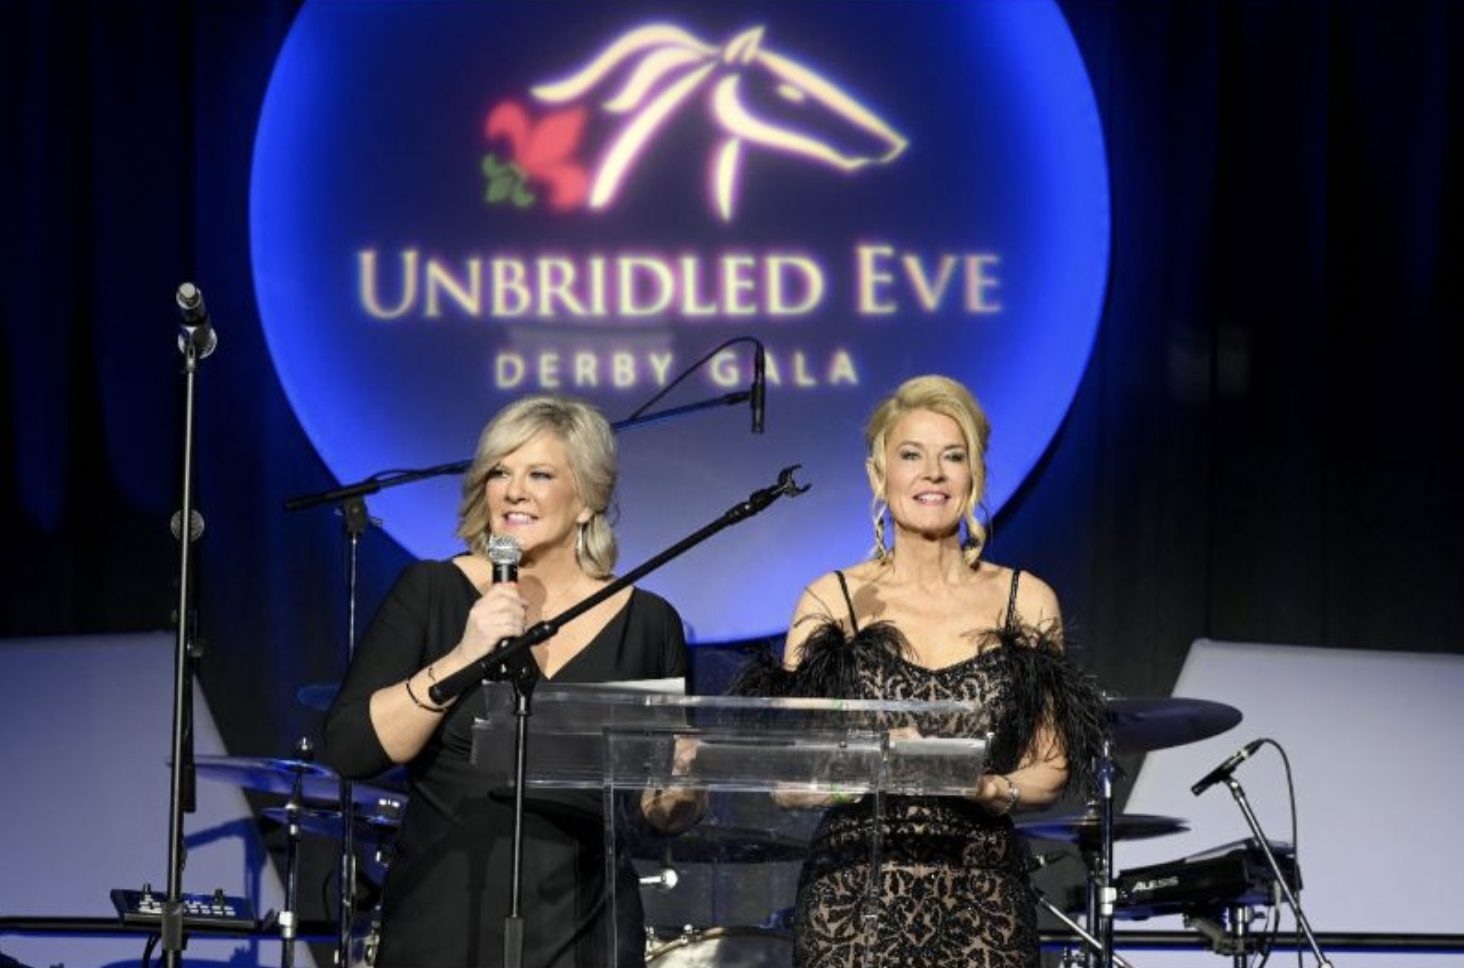 Hosts Of 10th Annual Unbridled Eve Gala ‘Incredibly Blessed’ To Again Benefit Blessings In A Backpack